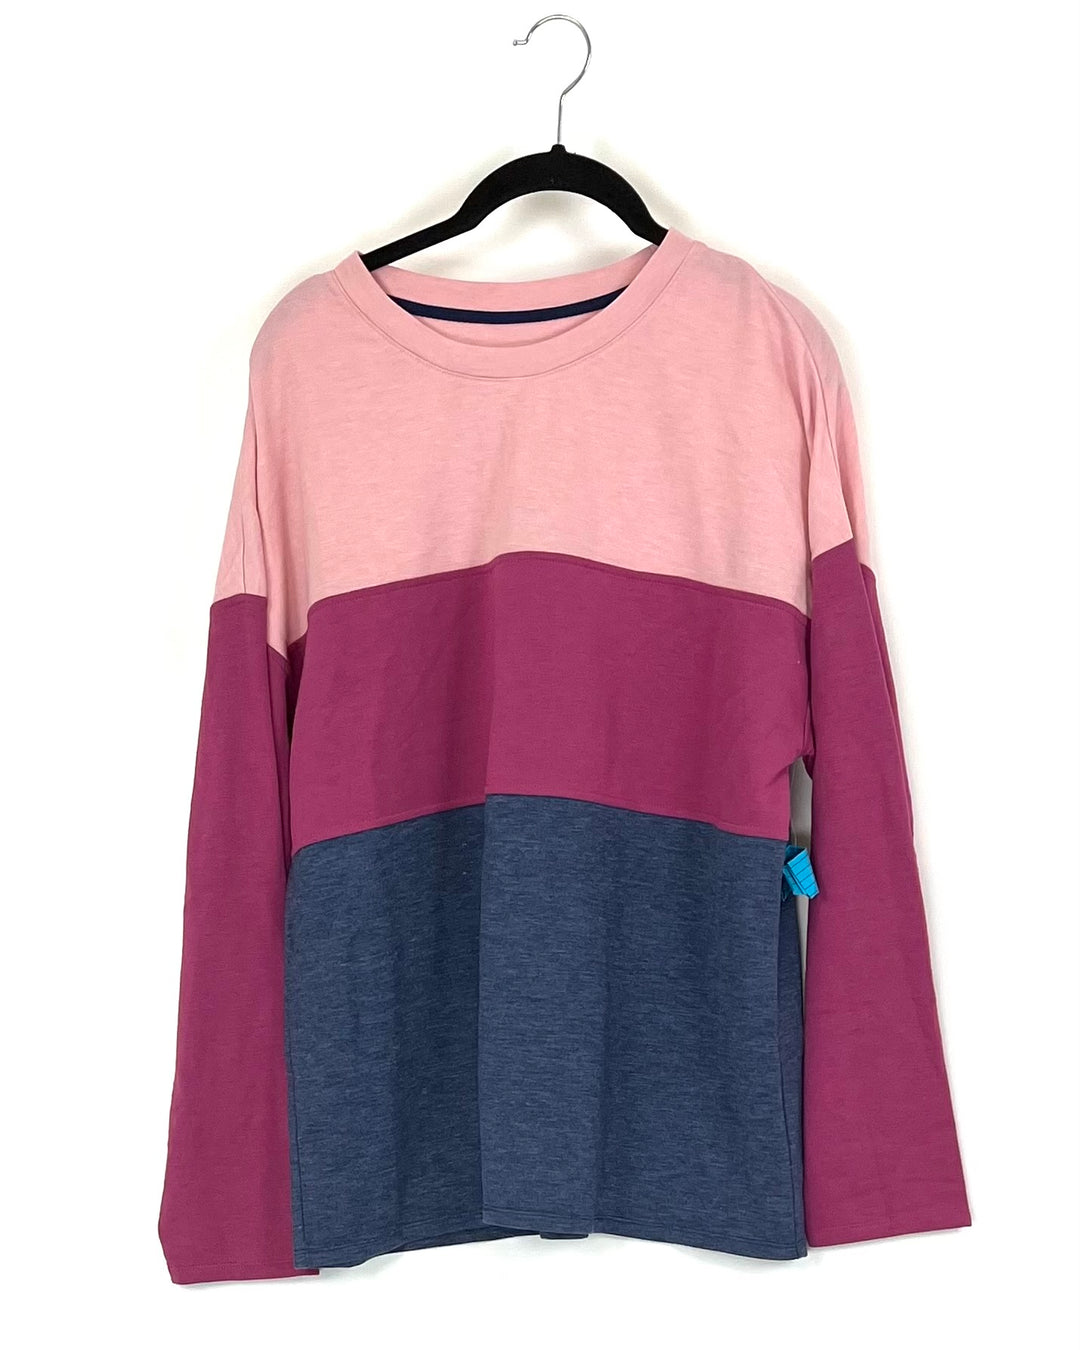 Pink And Navy Color Block Top - Size 4/6